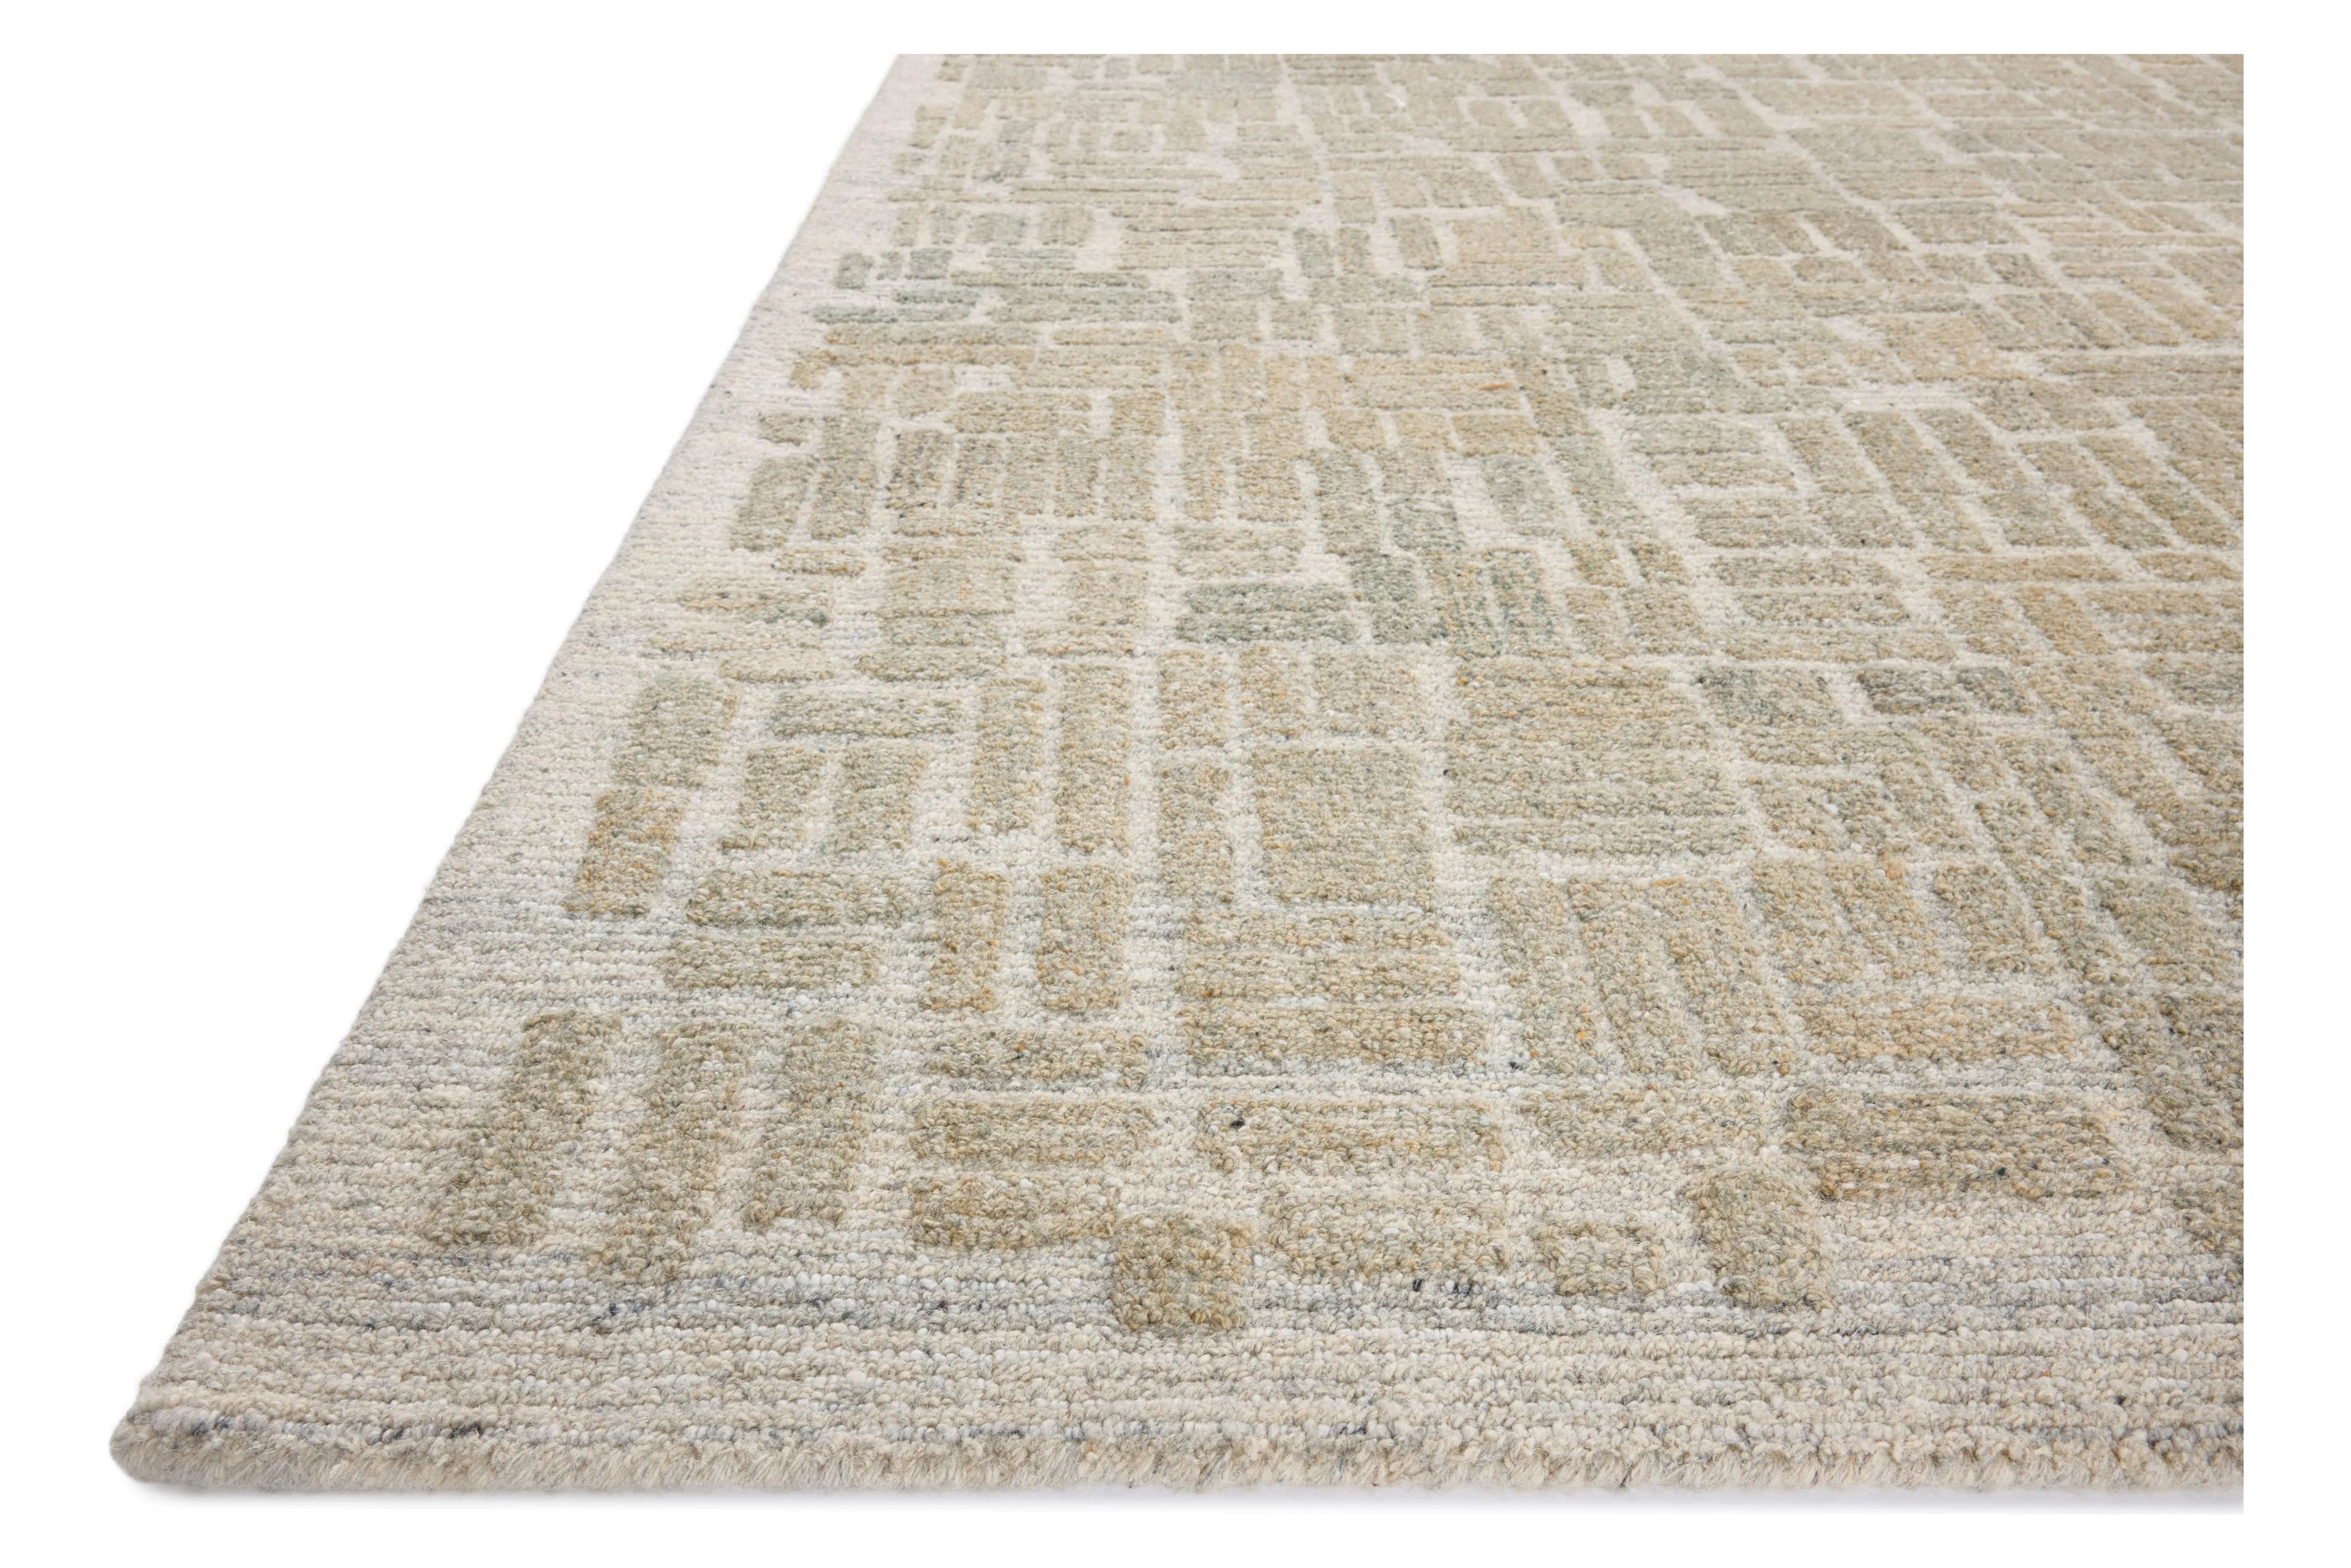 The Elias Pebble / Sage Rug is a hand-tufted wool area rug with lively graphic patterns in earth and stone tones. There’s a unique texture to the rug made by over-tufting, in which a design is hand-tufted over a tufted base, creating a subtle high-low pile. Amethyst Home provides interior design, new home construction design consulting, vintage area rugs, and lighting in the Park City metro area.